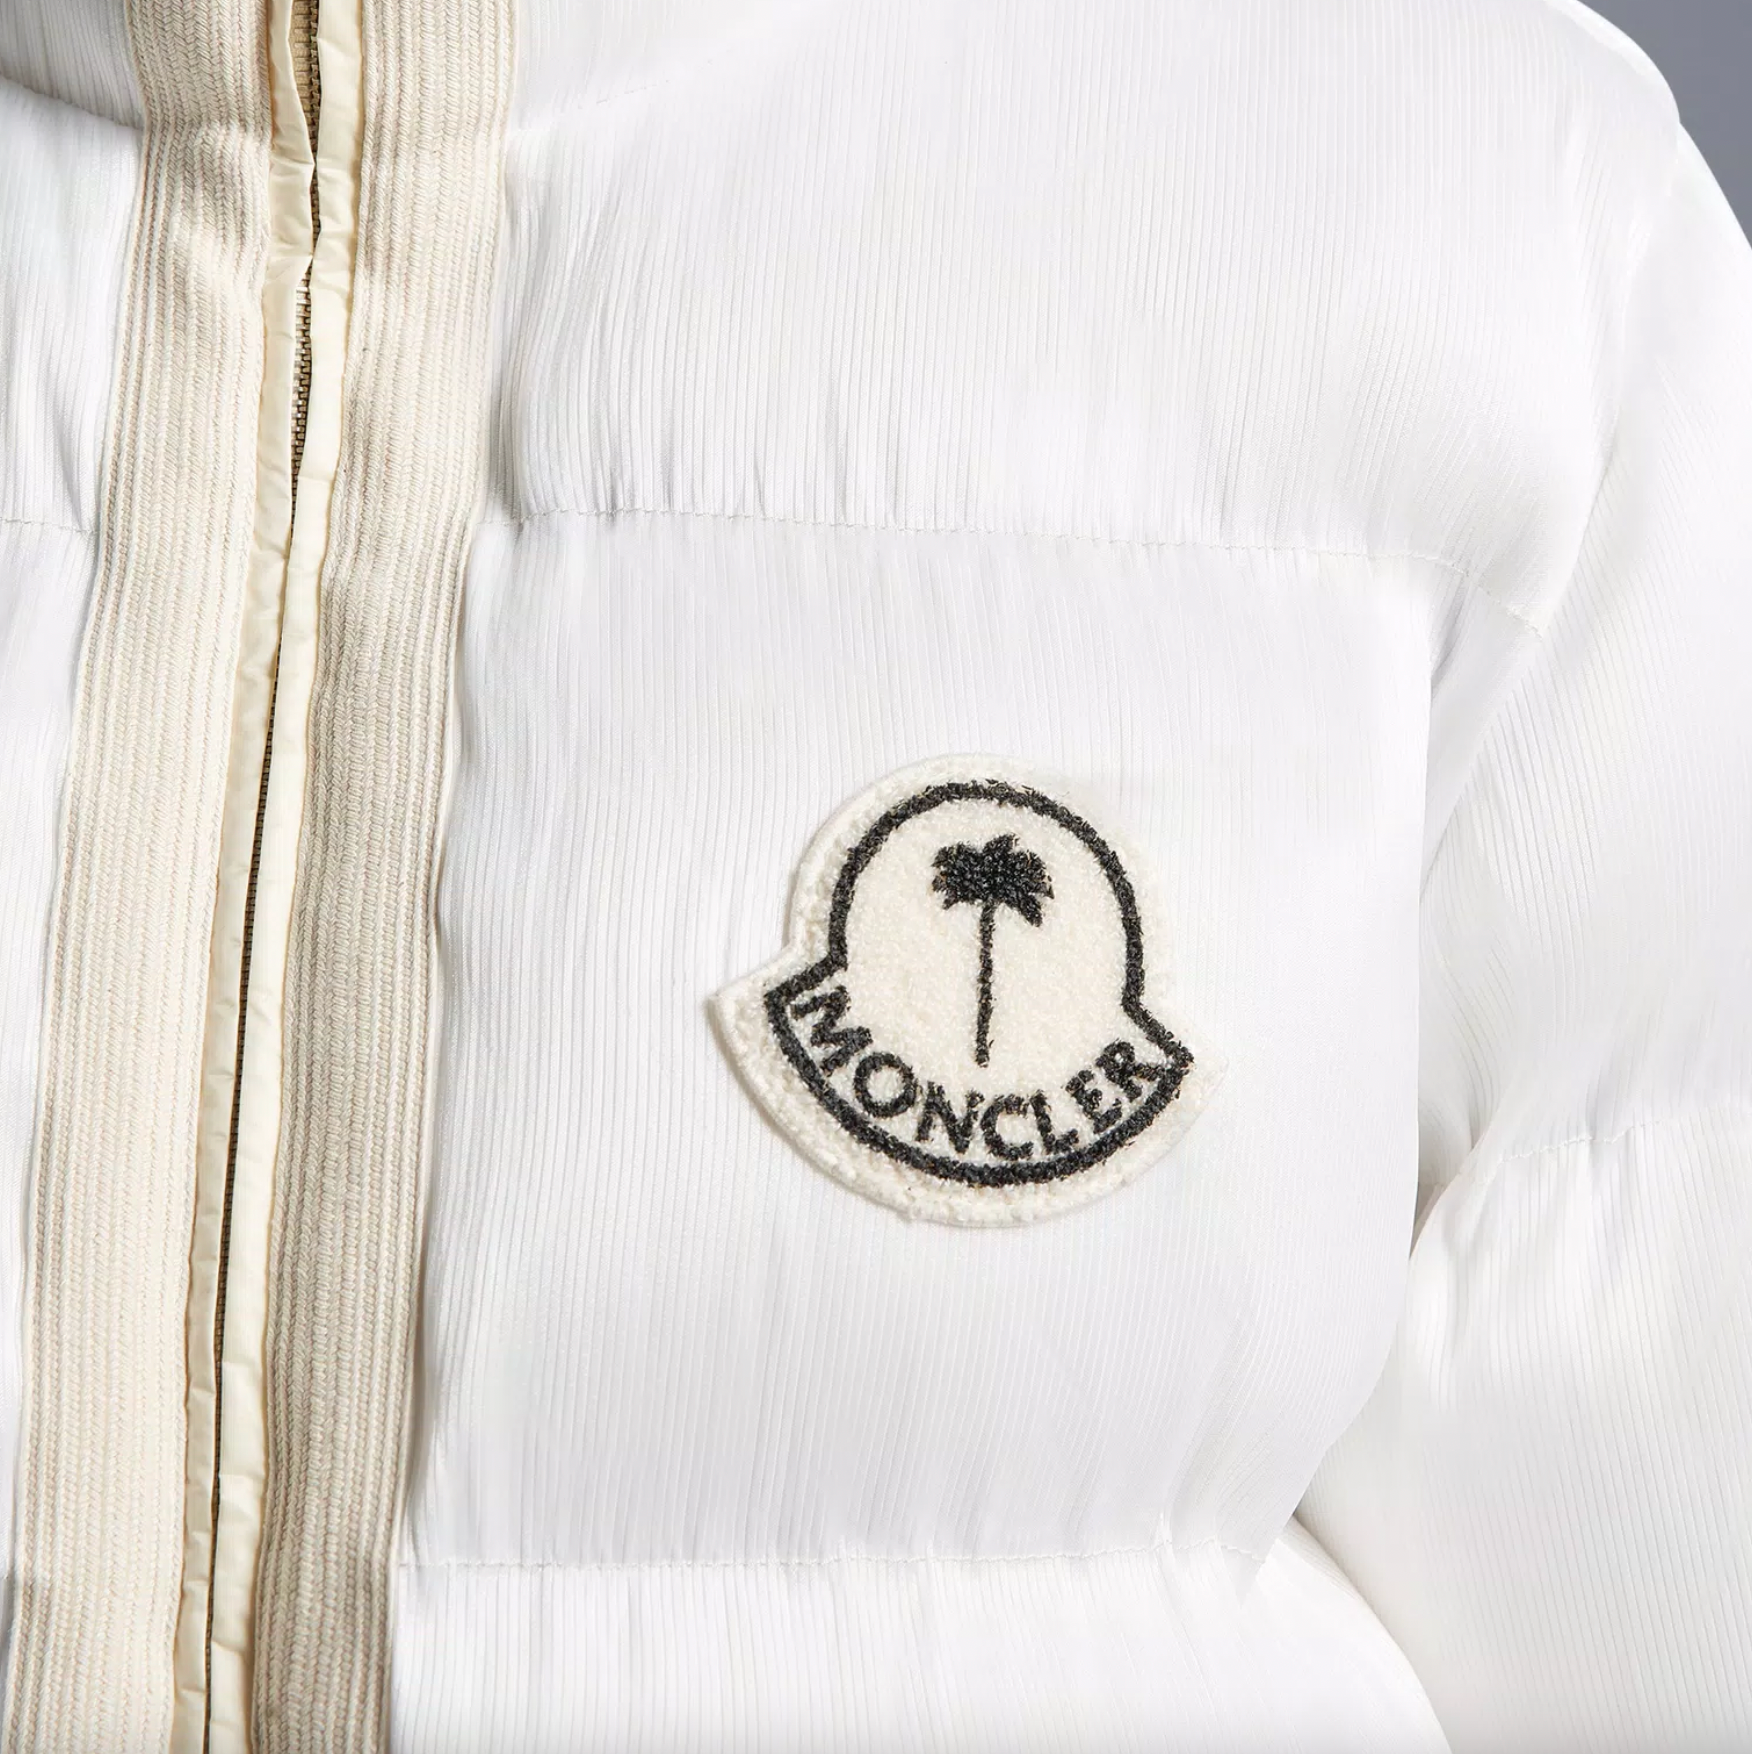 Moncler Maya 70 by Palm Angels Jacket Bright White - FW22 - GB